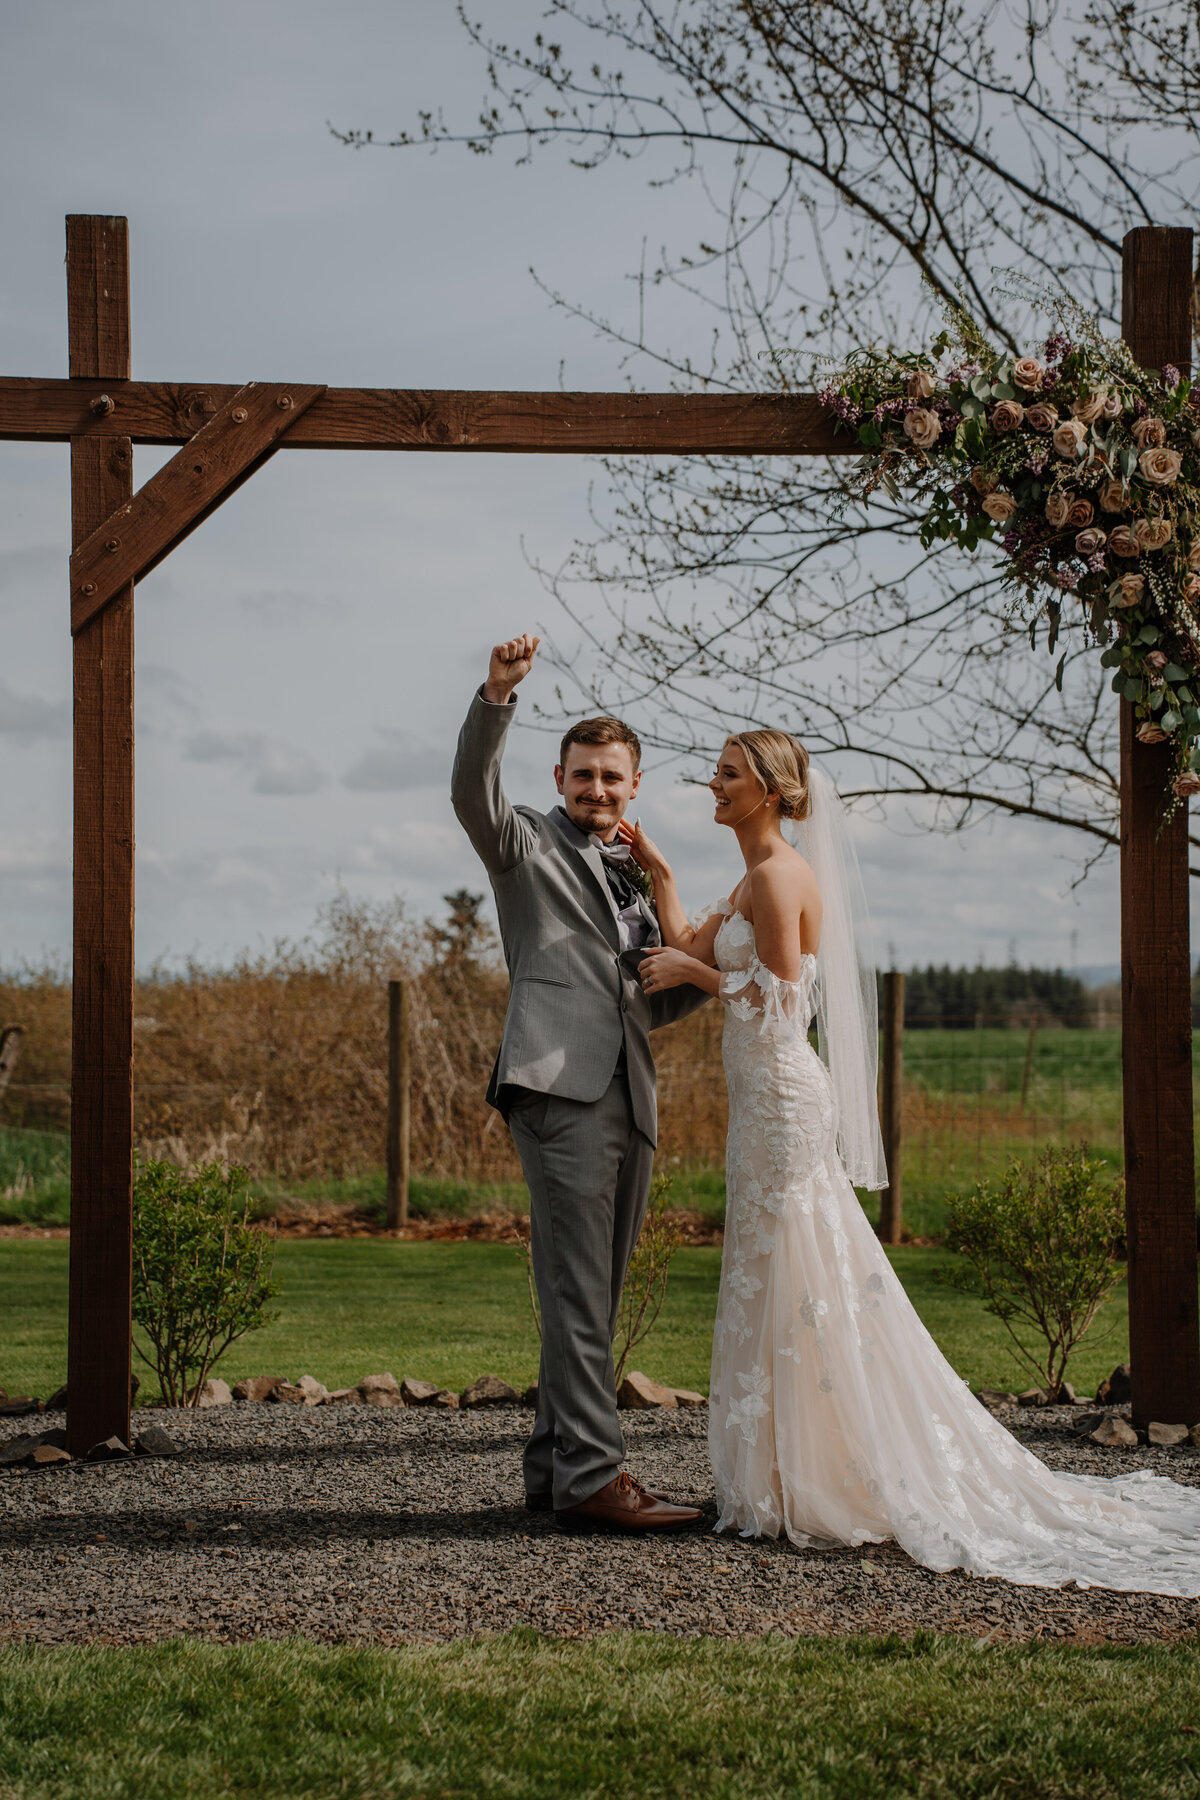 Groom holding up fist with bride